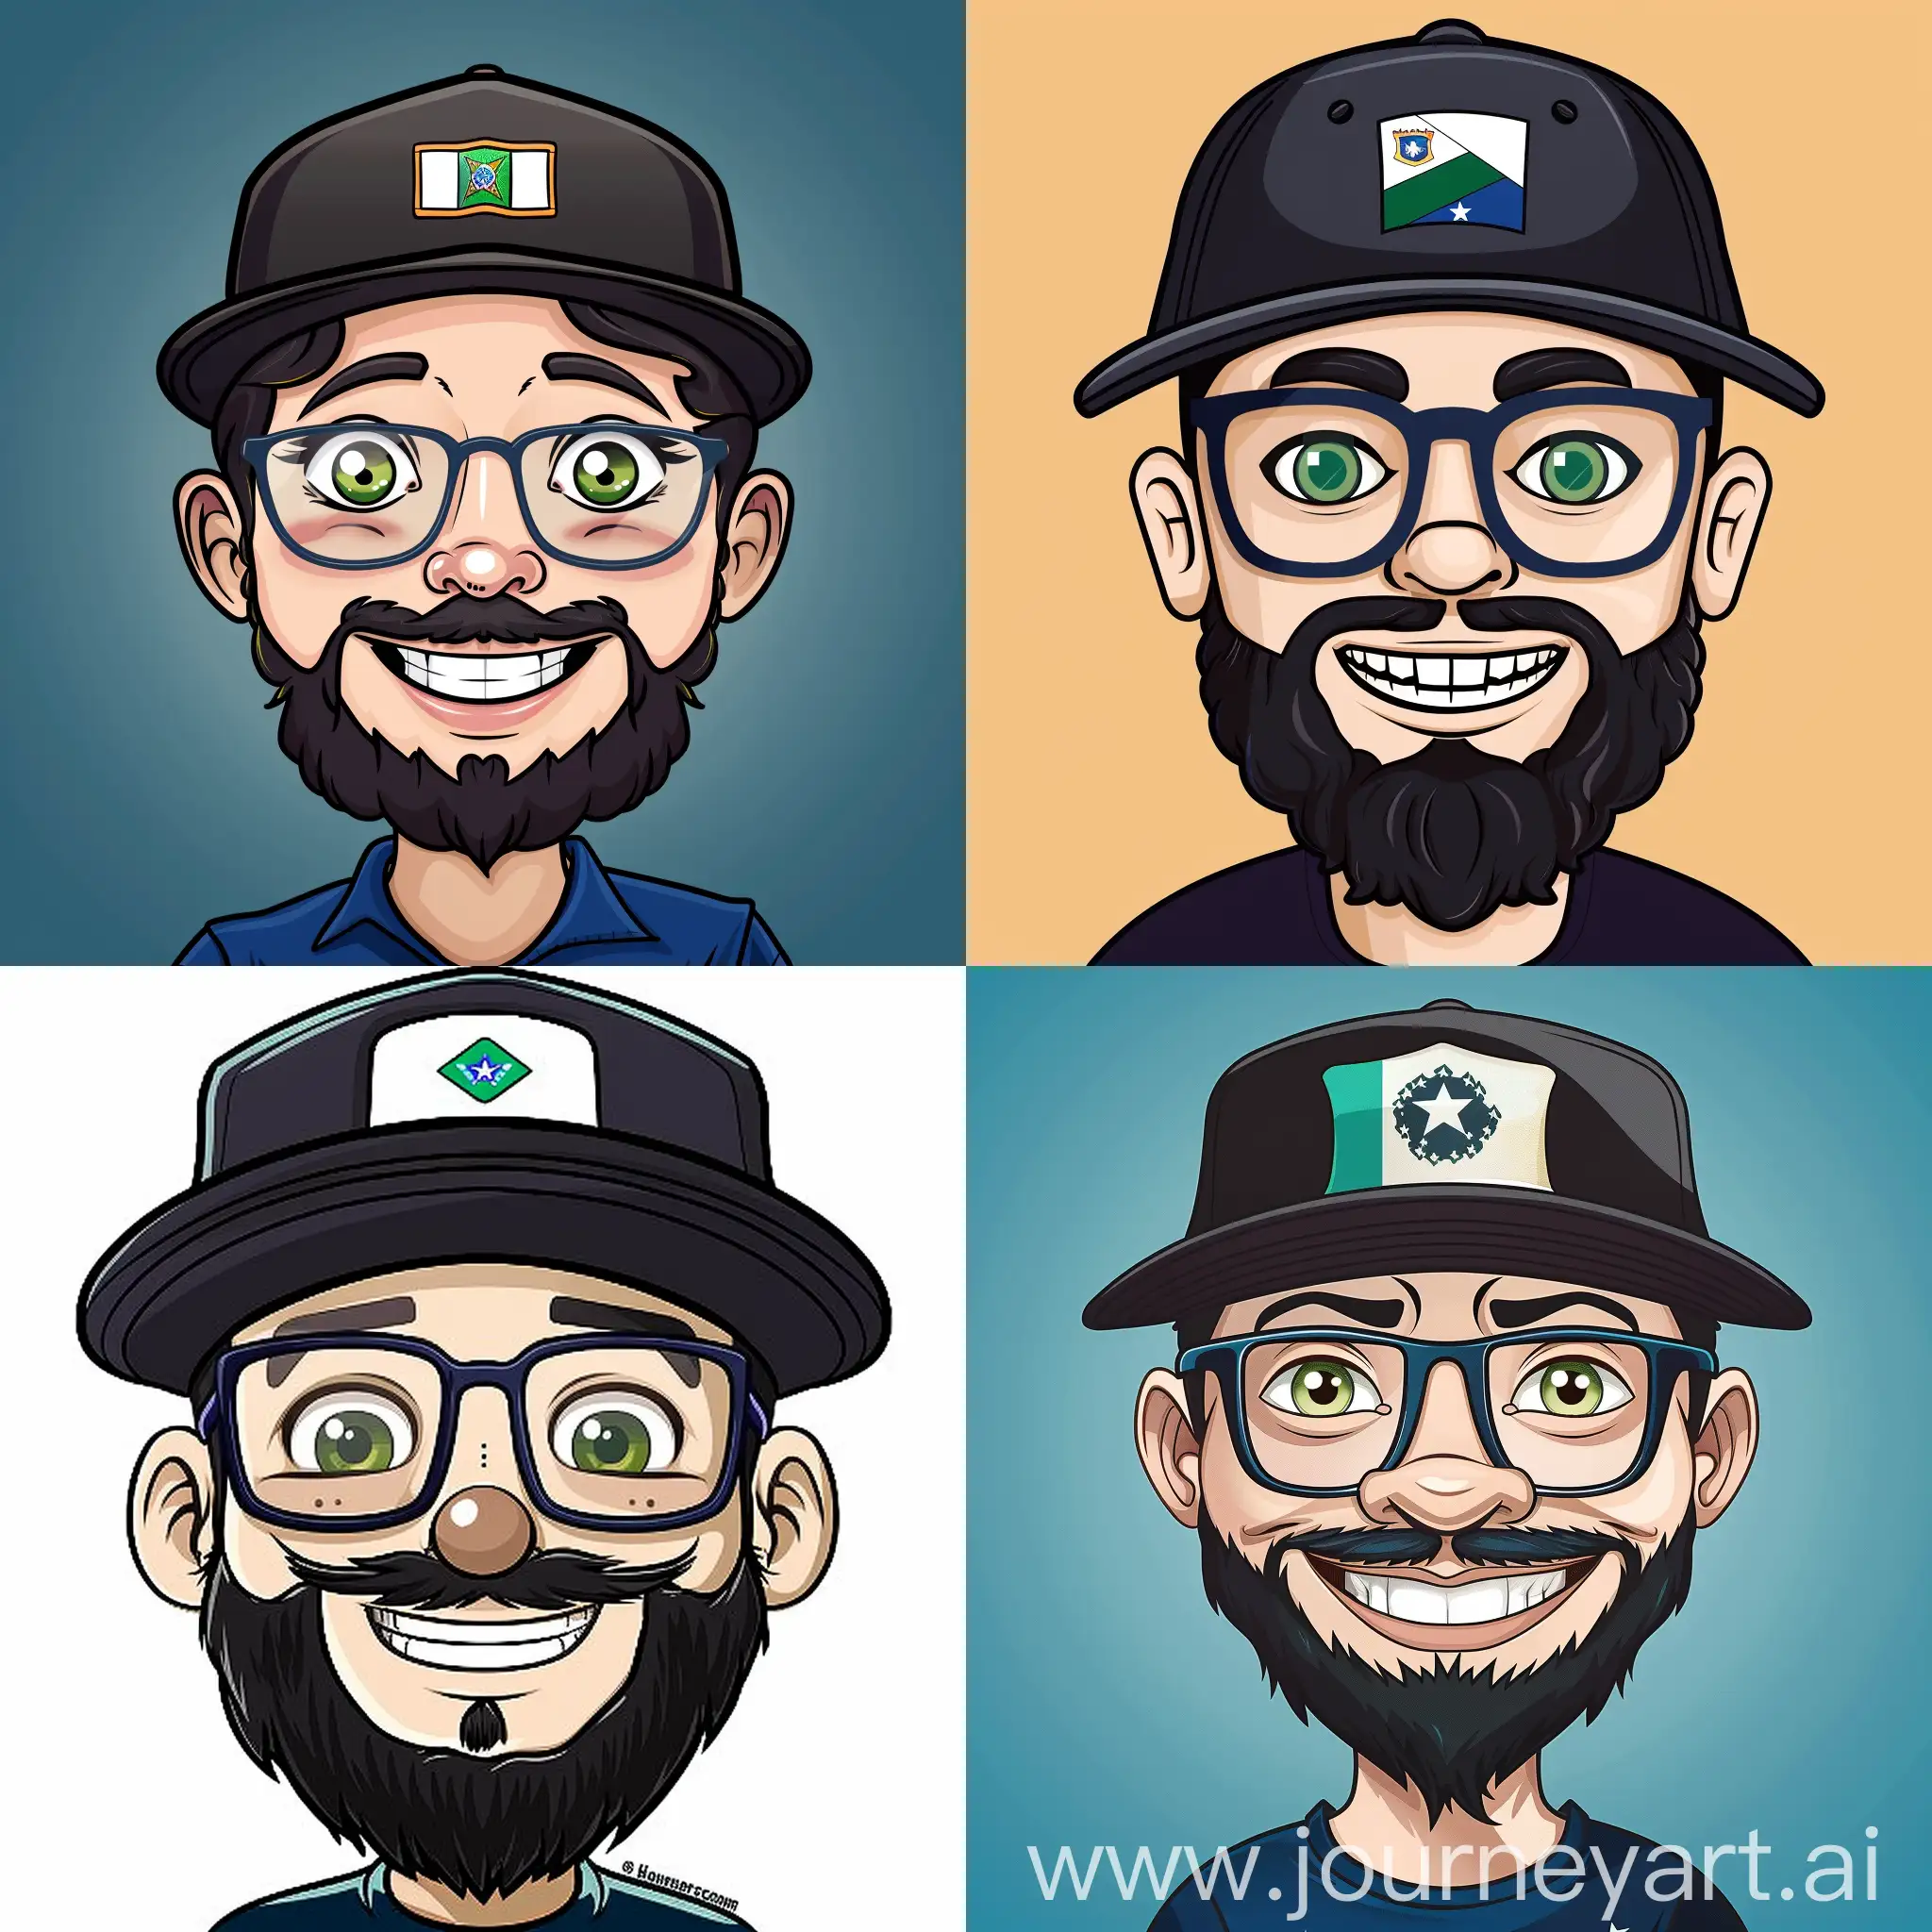 Cartoon of a smiling young white man, black cap with a honduras flag on front, black thick beard, green eyes, big nose, dark blue eye glasses